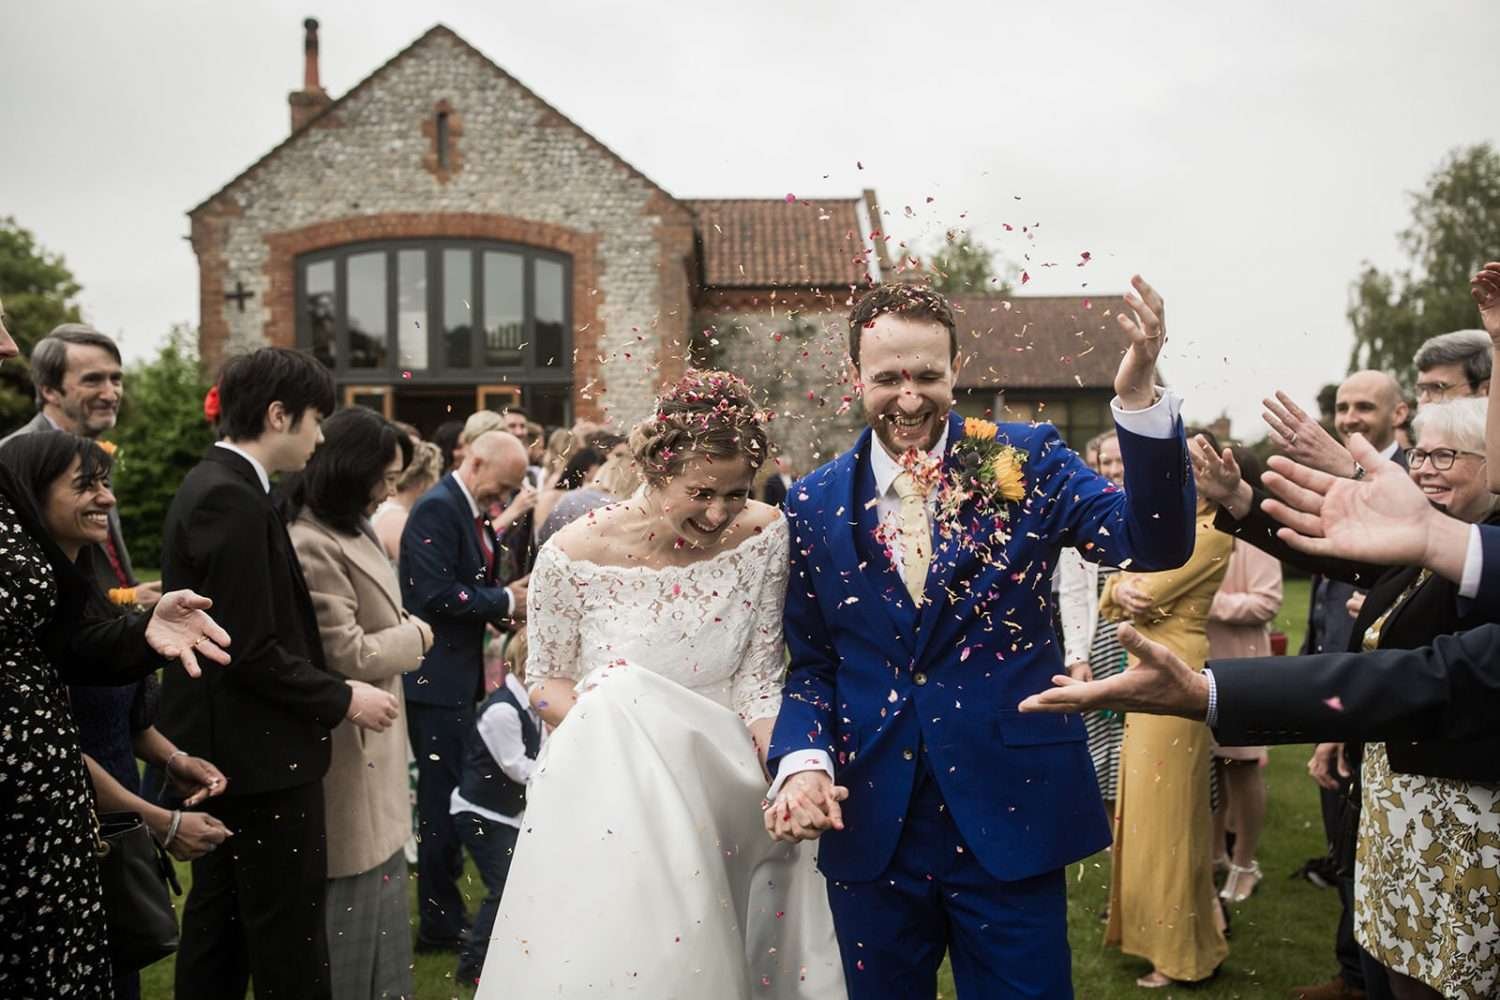 at a chaucer barn wedding we see the bride and groom laughing and walking through a funnel of their guests who are throwing confetti at them 